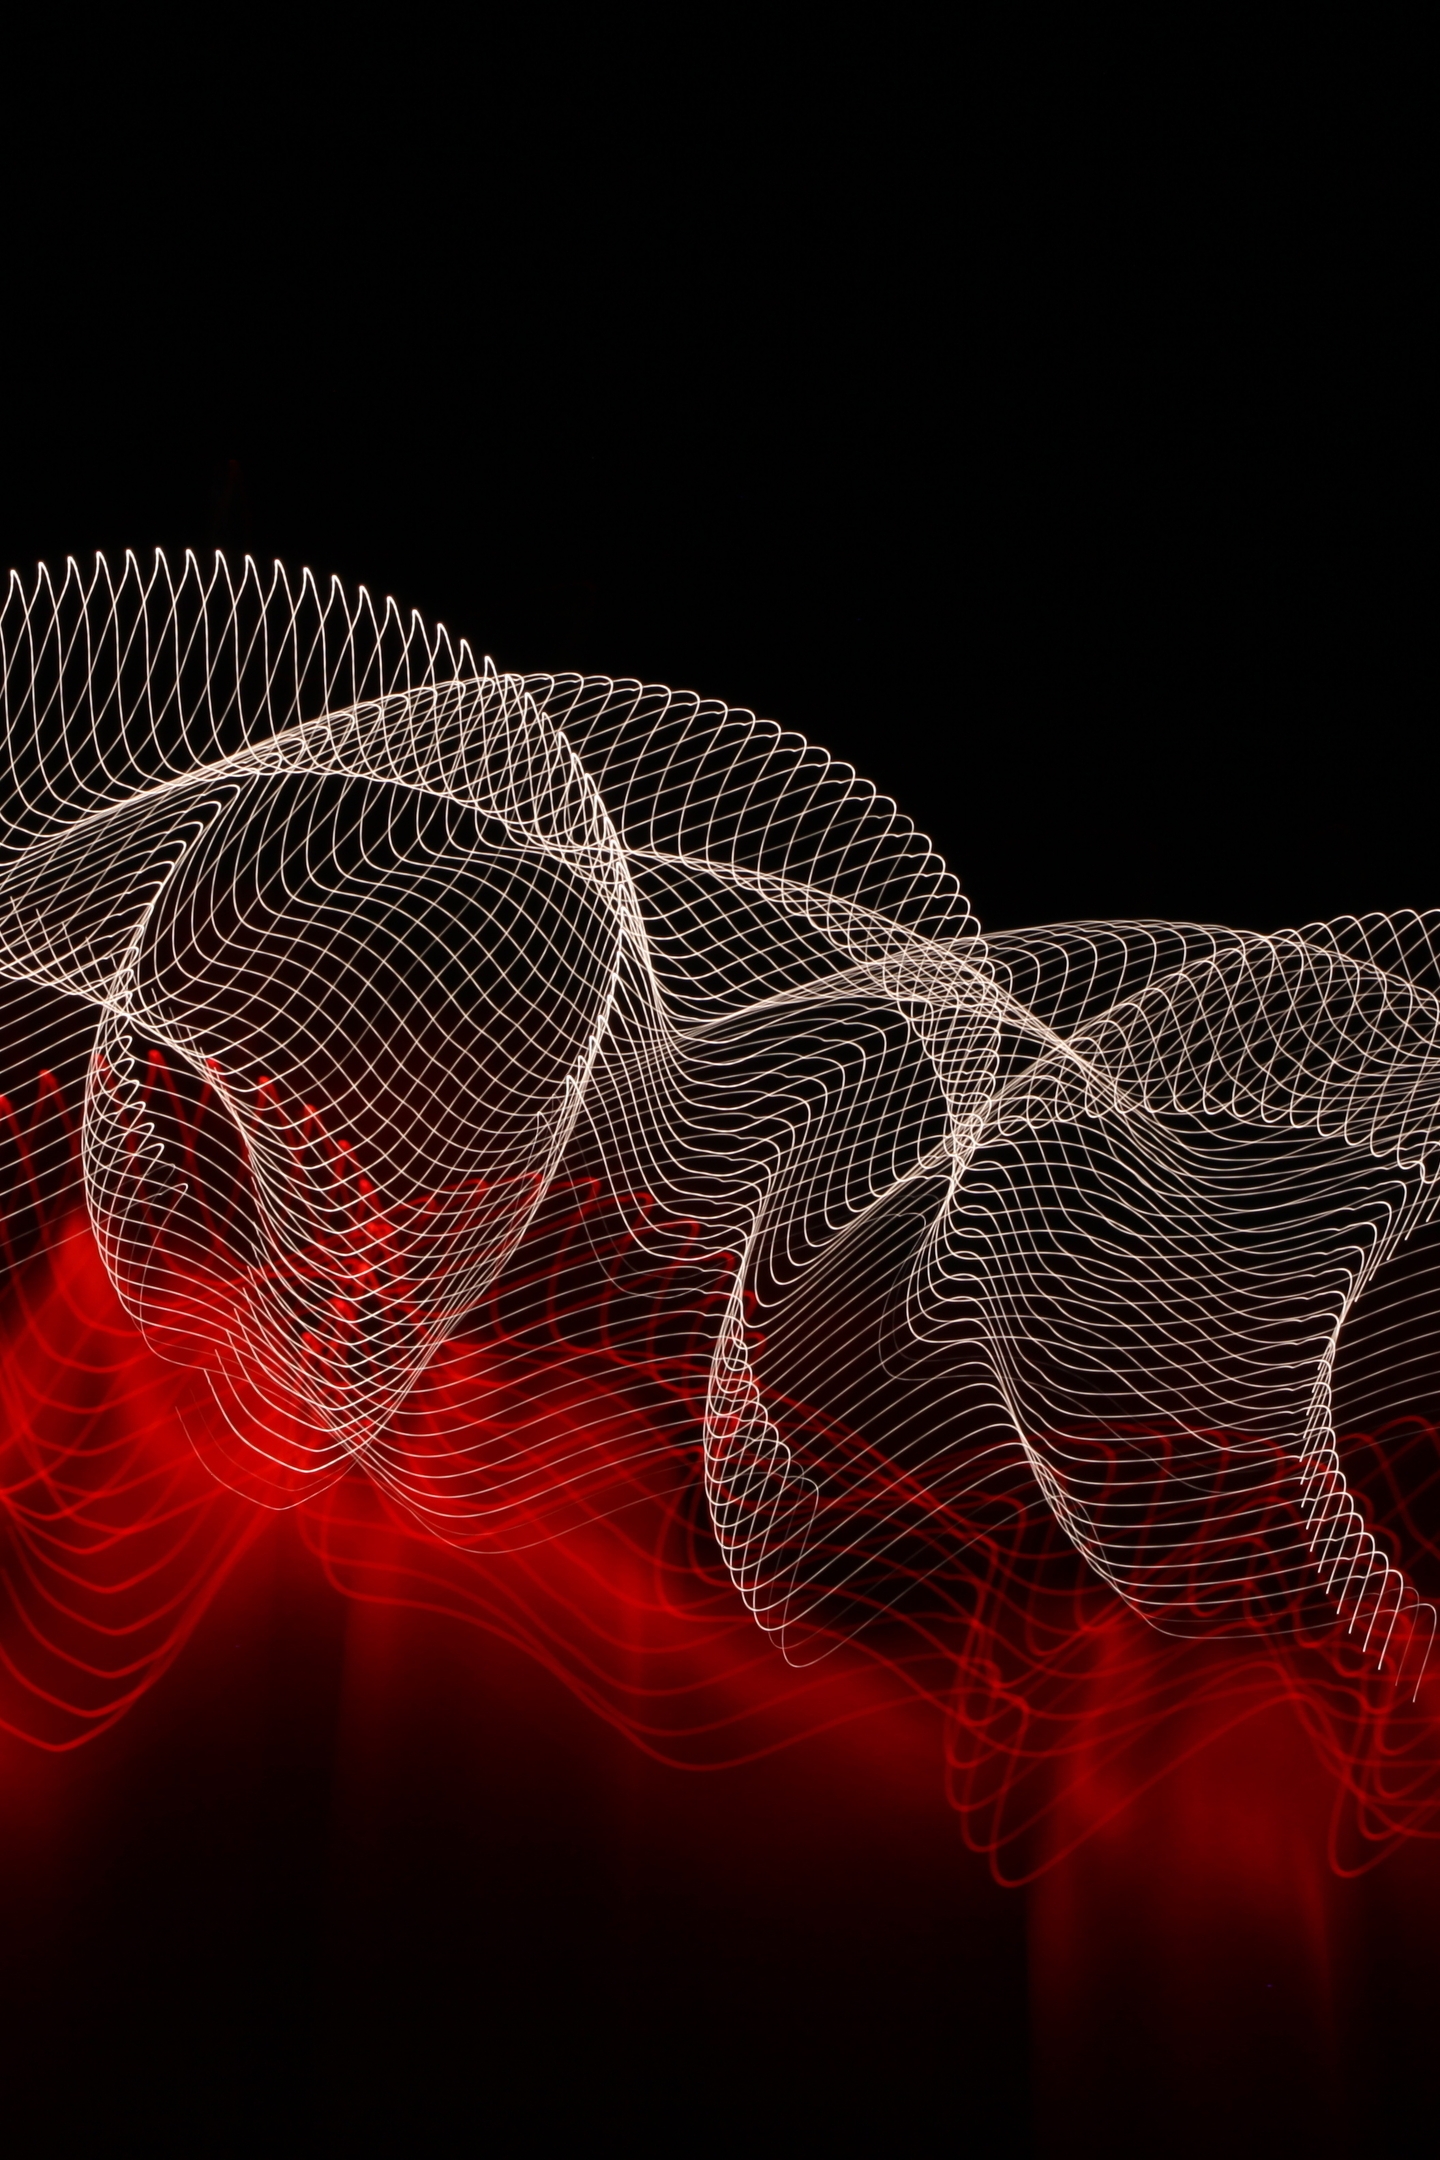 Image: Curls, grid, lines, red, white, black background